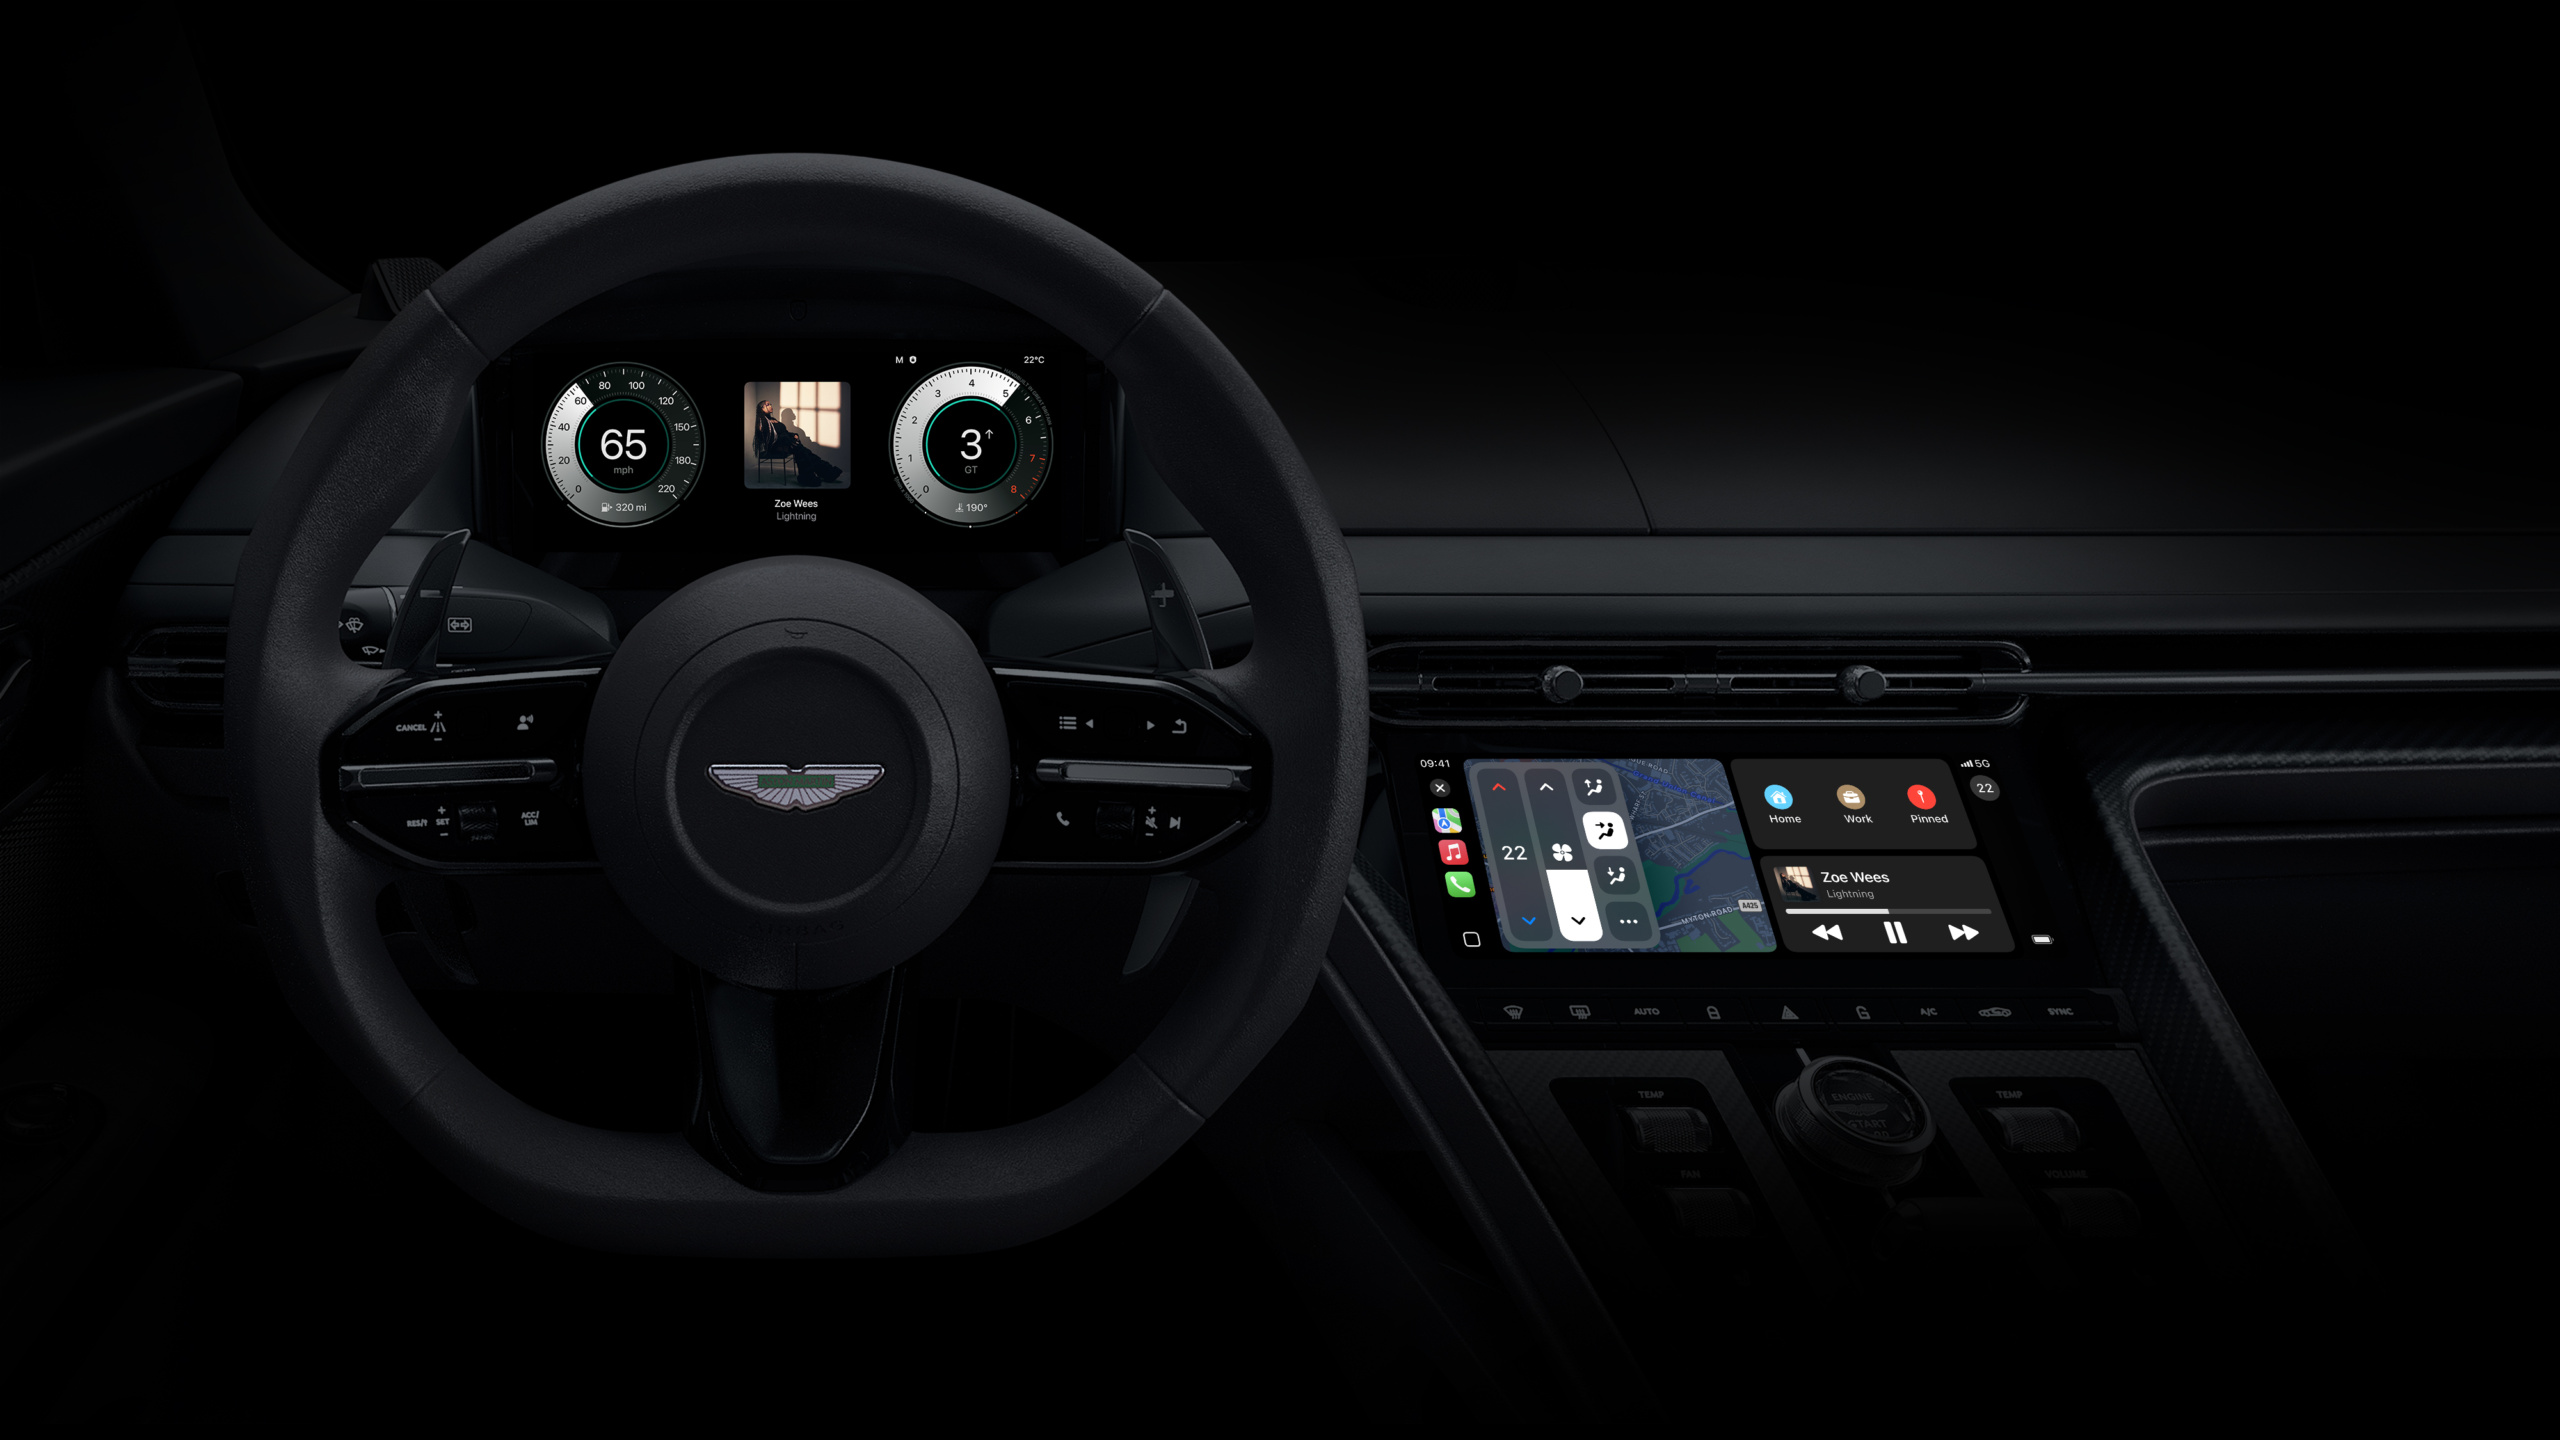 Porsche and Aston Martin will be the first to get next-generation immersive Apple CarPlay